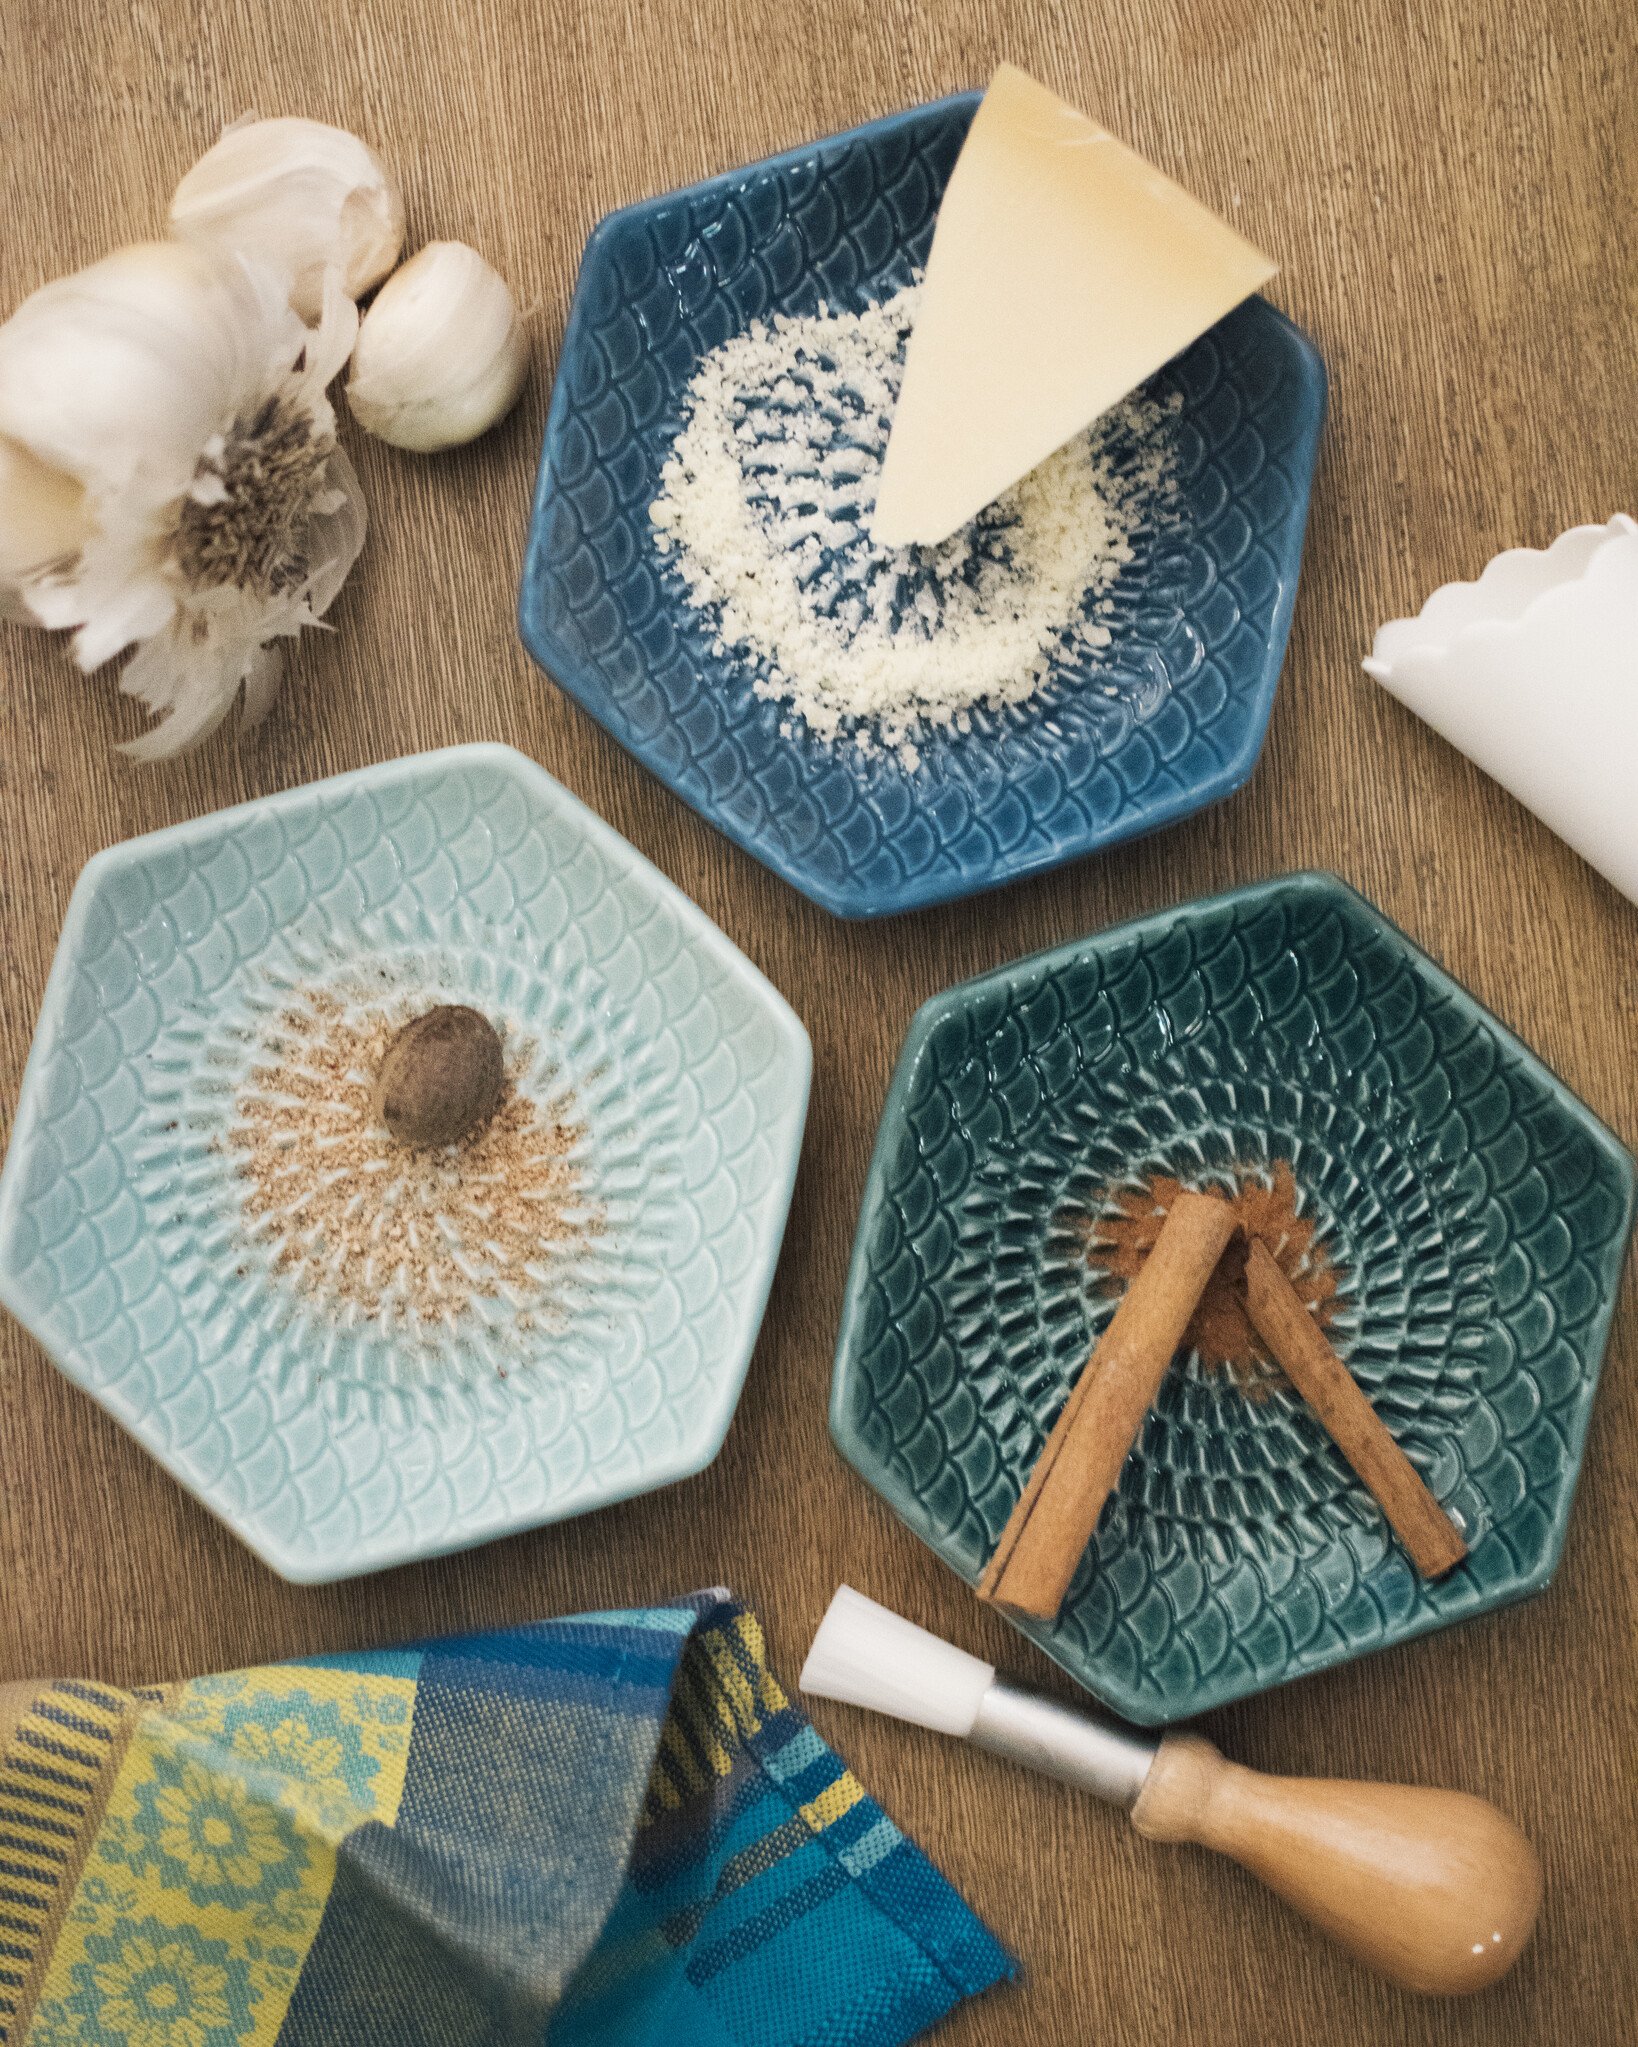 The Grate Plate Grate Plate 3pc Set Blue Tie Dye